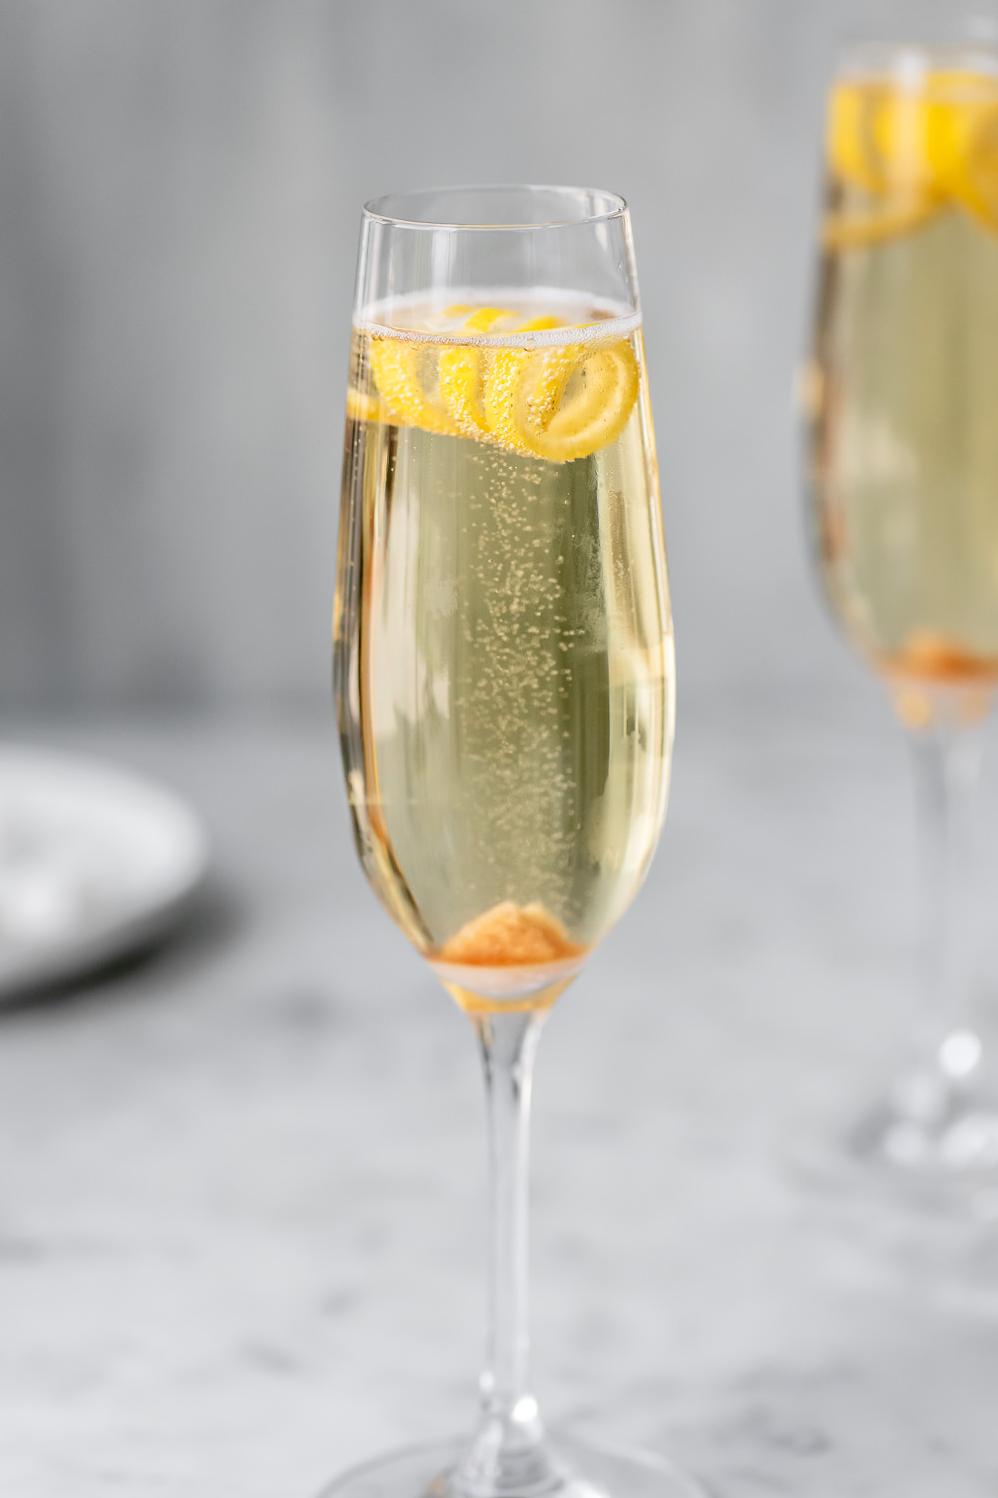  Champagne and a hint of sweetness make for a beautiful pairing in this martini.